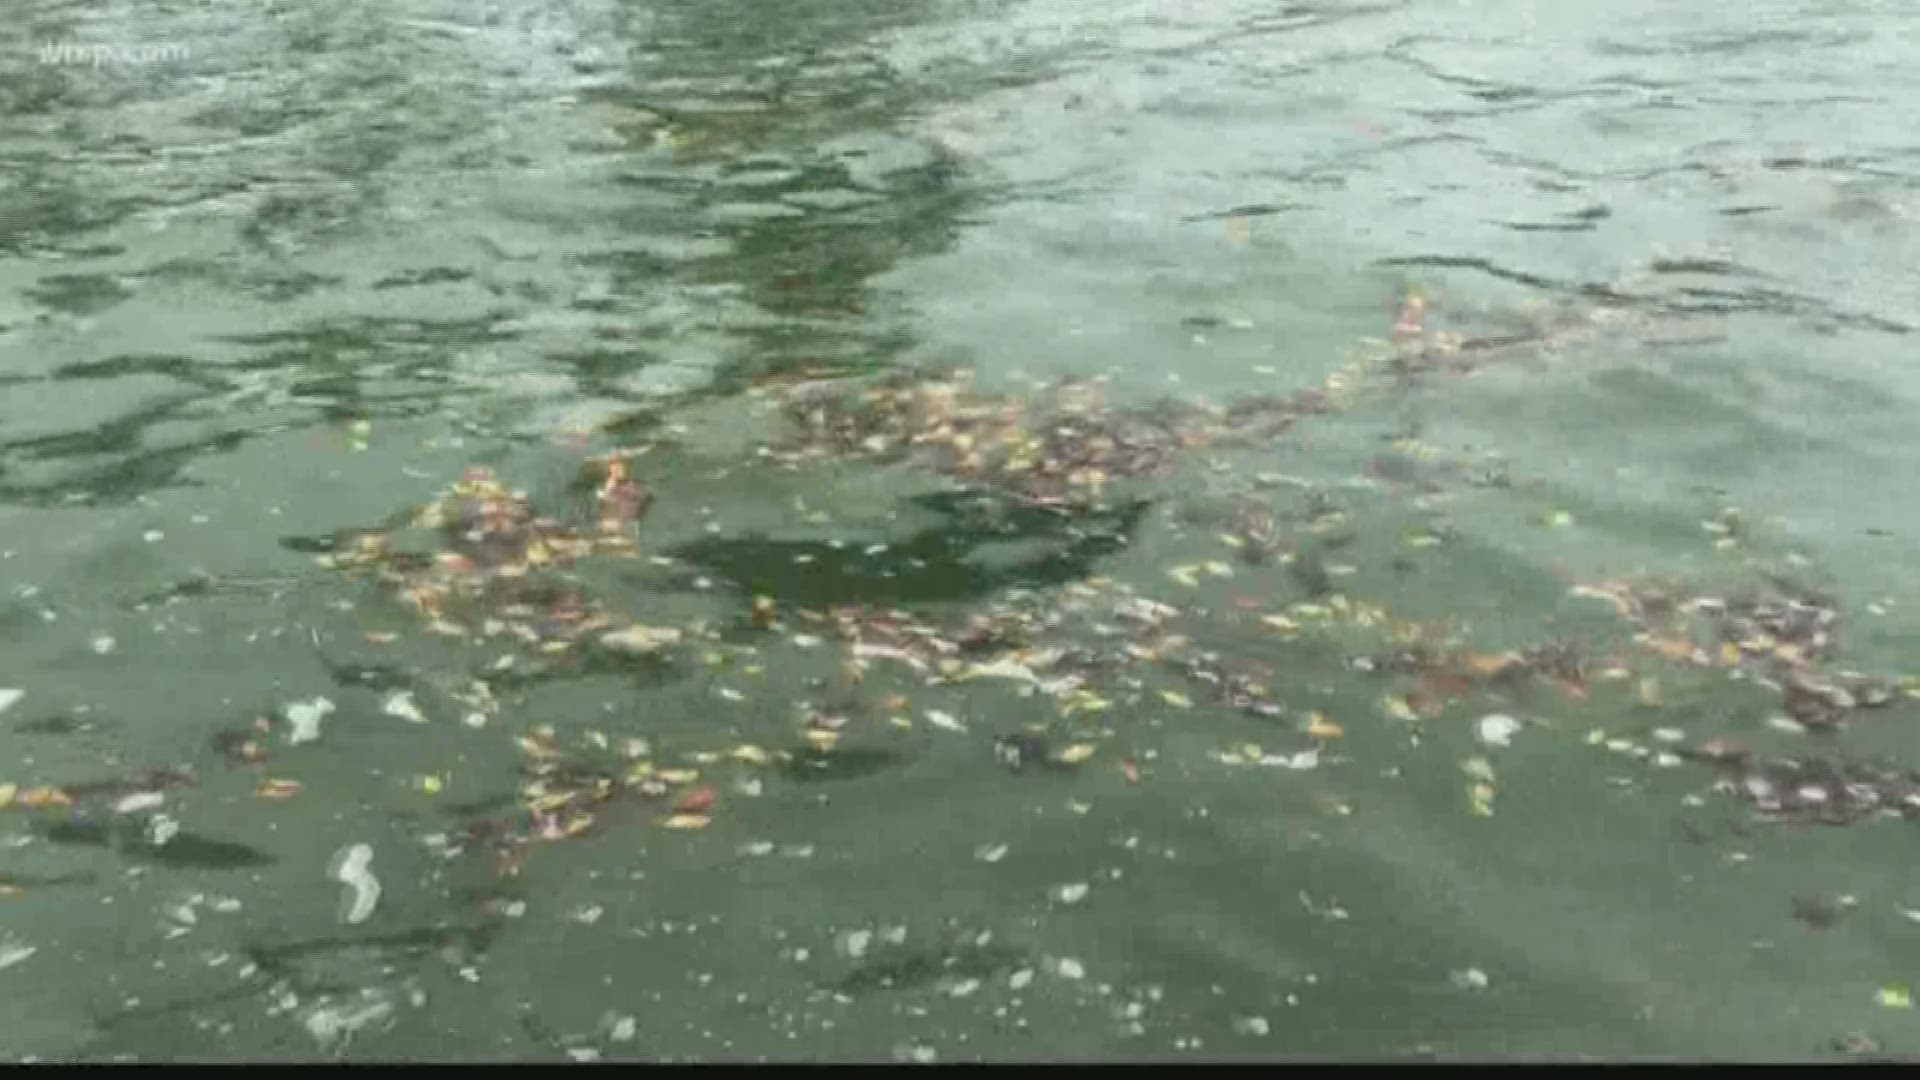 Boaters in Treasure Island have noticed clumps of blue-green algae in canals.

"As far as the blue-green algae, there's a decent amount of it, it will vary from day to day and with tides," Steven Schumacher told 10News.